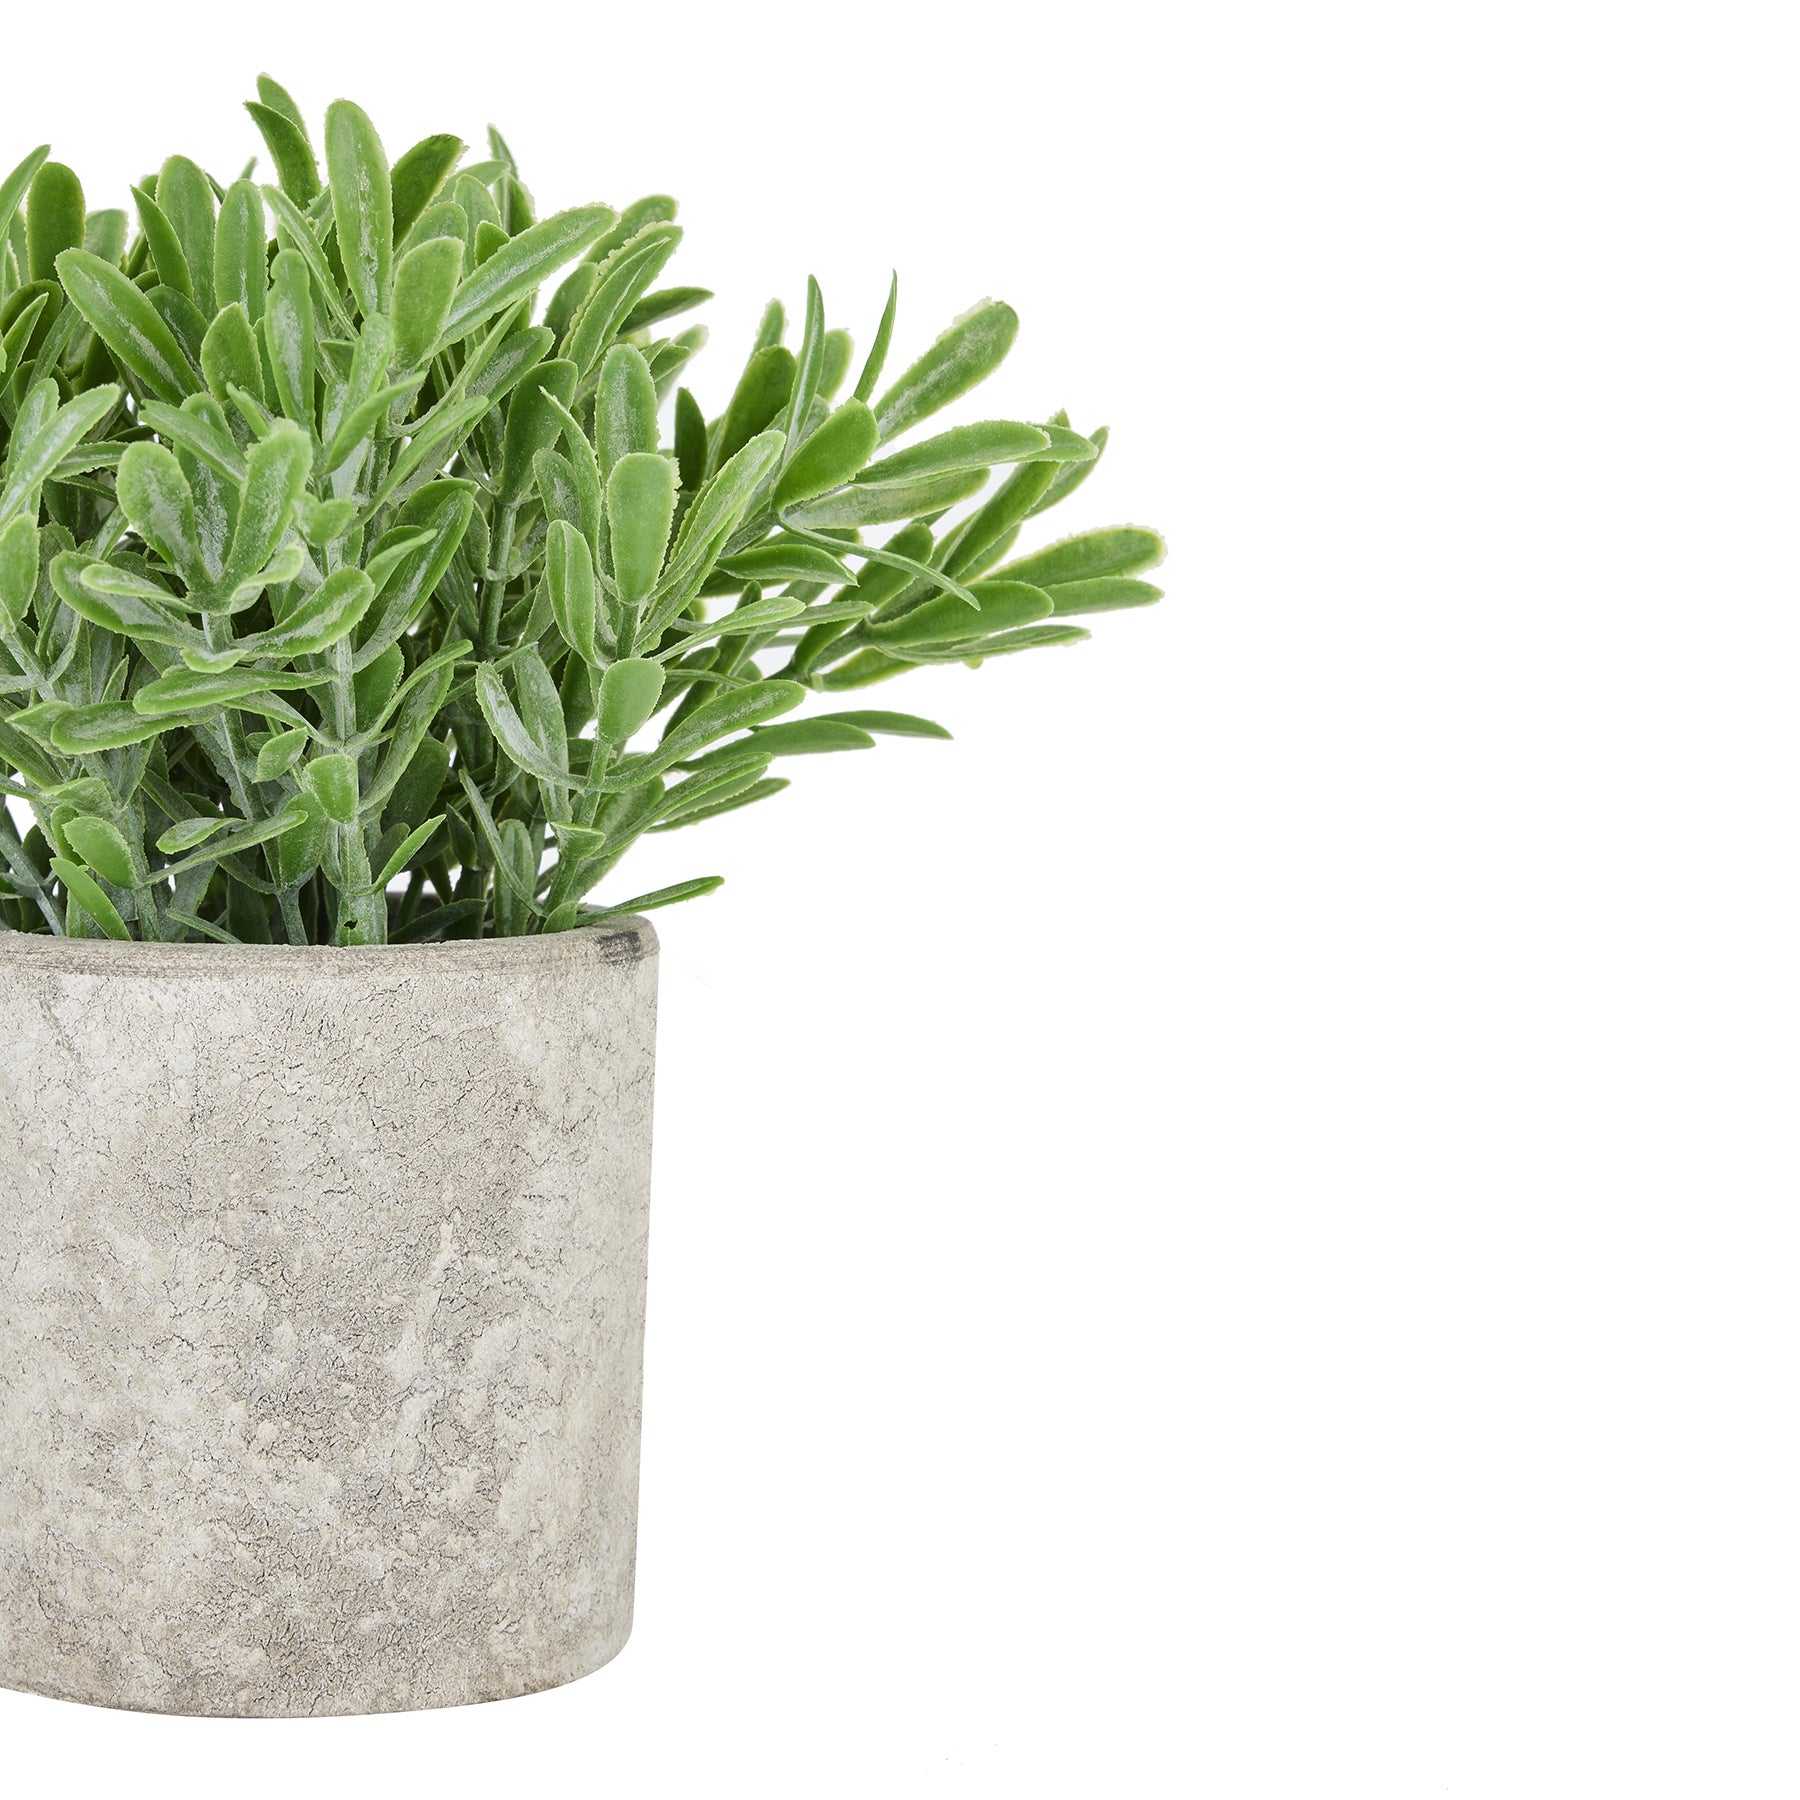 Buxus Plant In Stone Effect Pot